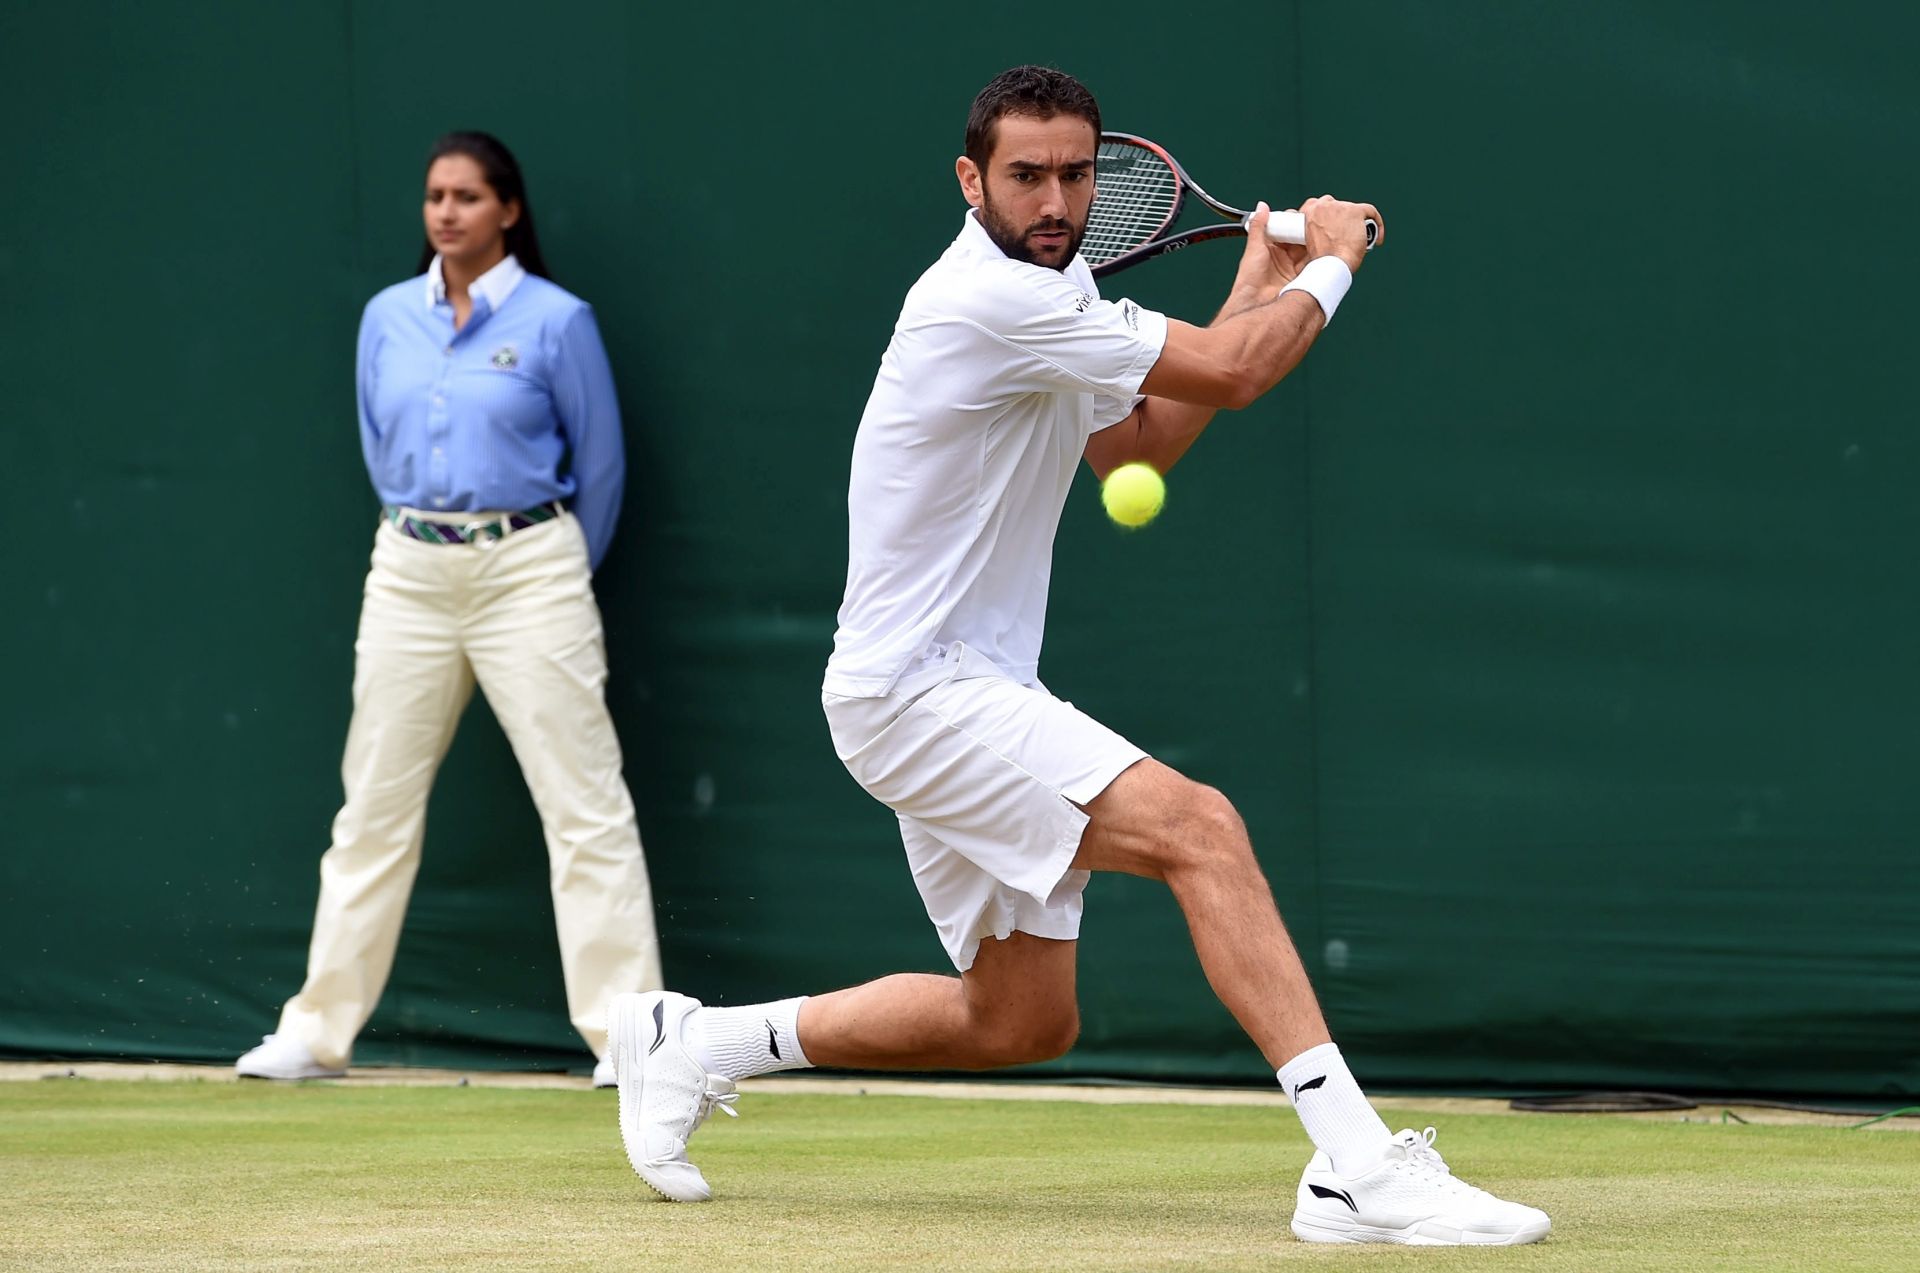 epa05407119 Marin Cilic of Croatia returns to Kei Nishikori of Japan in their fourth round match during the Wimbledon Championships at the All England Lawn Tennis Club, in London, Britain, 04 July 2016  EPA/GERRY PENNY EDITORIAL USE ONLY/NO COMMERCIAL SALES